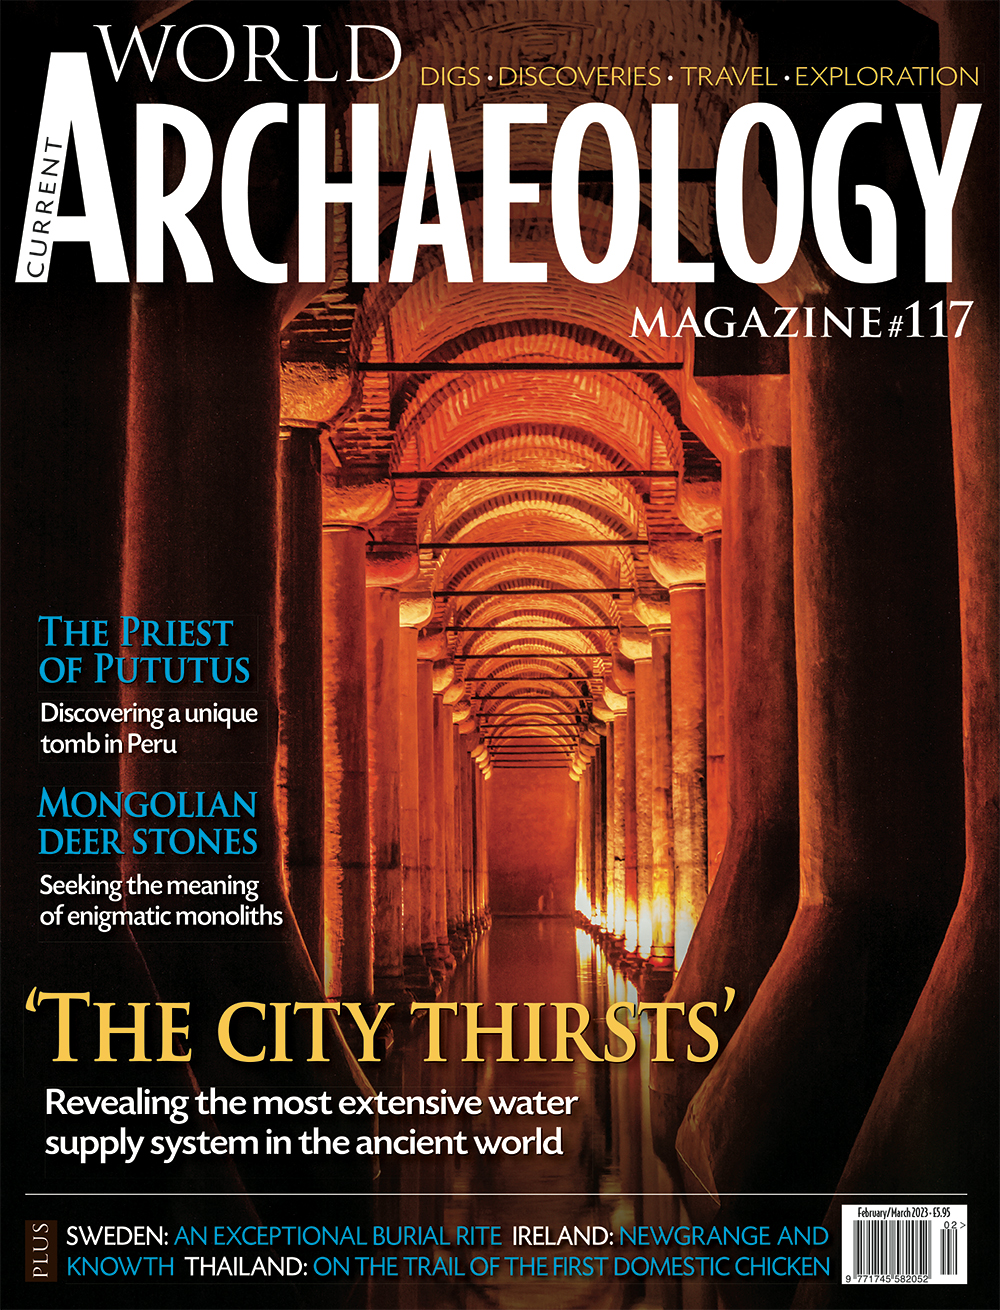 Current World Archaeology issue 117